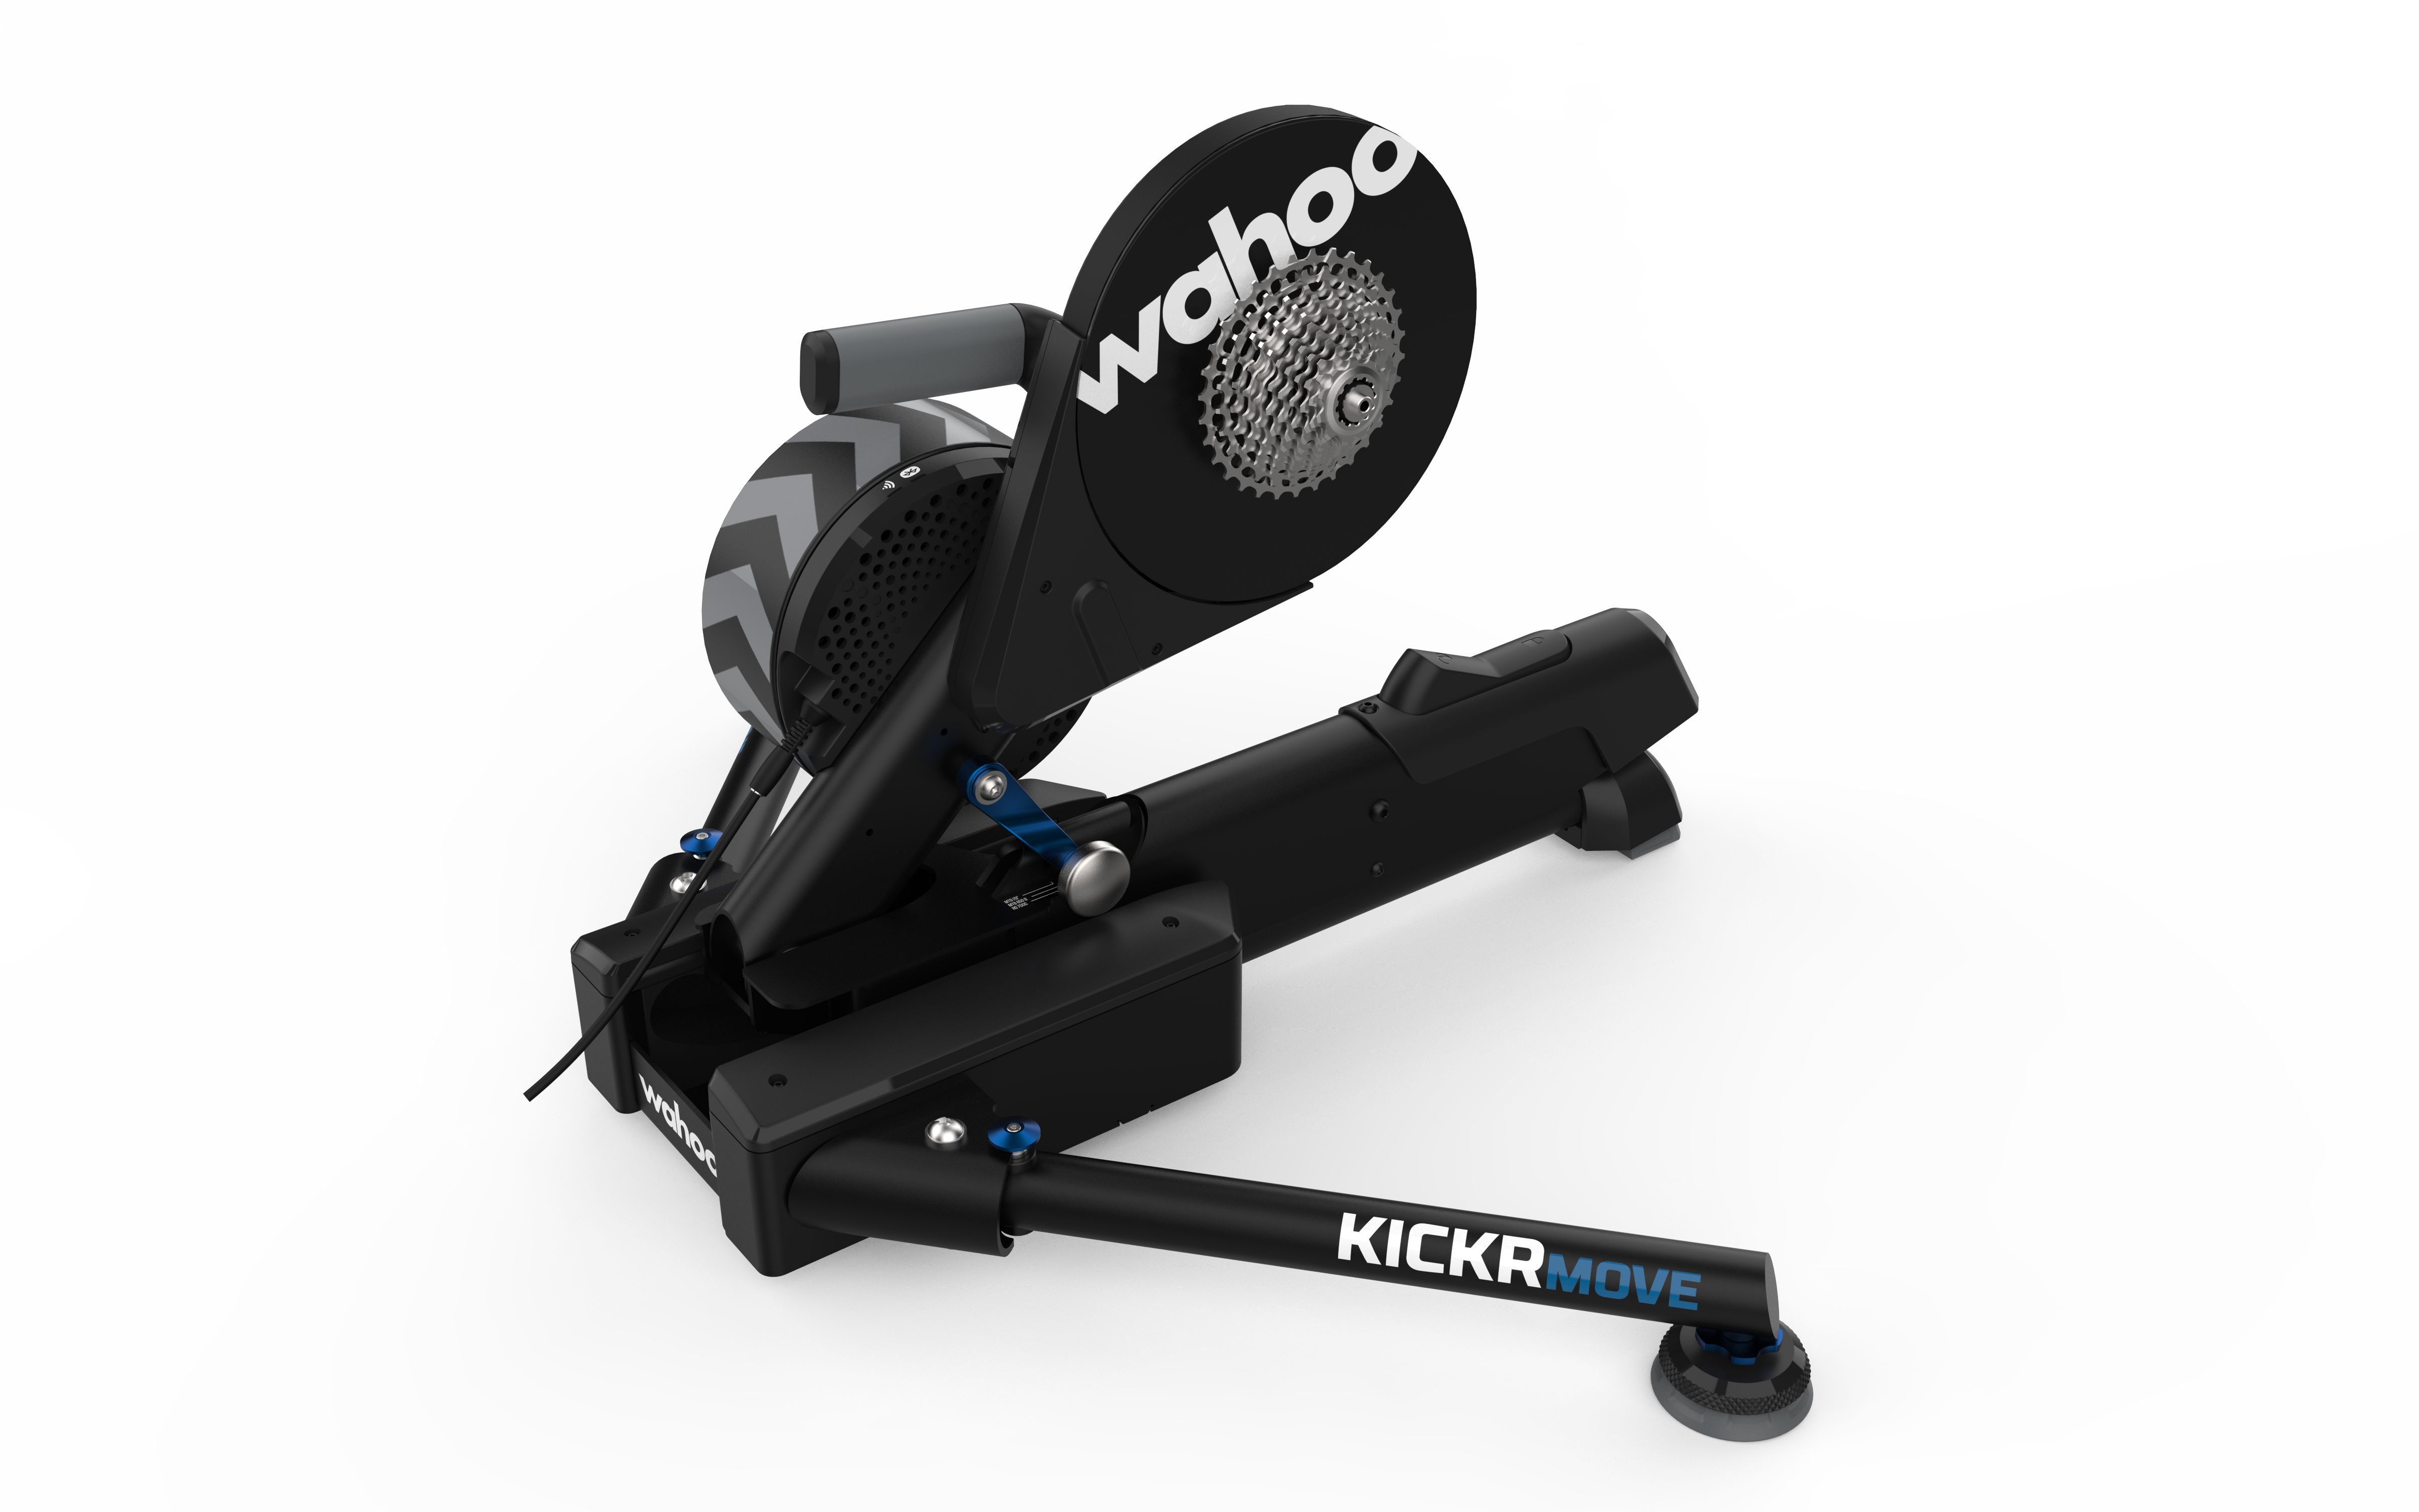 Wahoo releases two new indoor trainer models with the Kickr move 